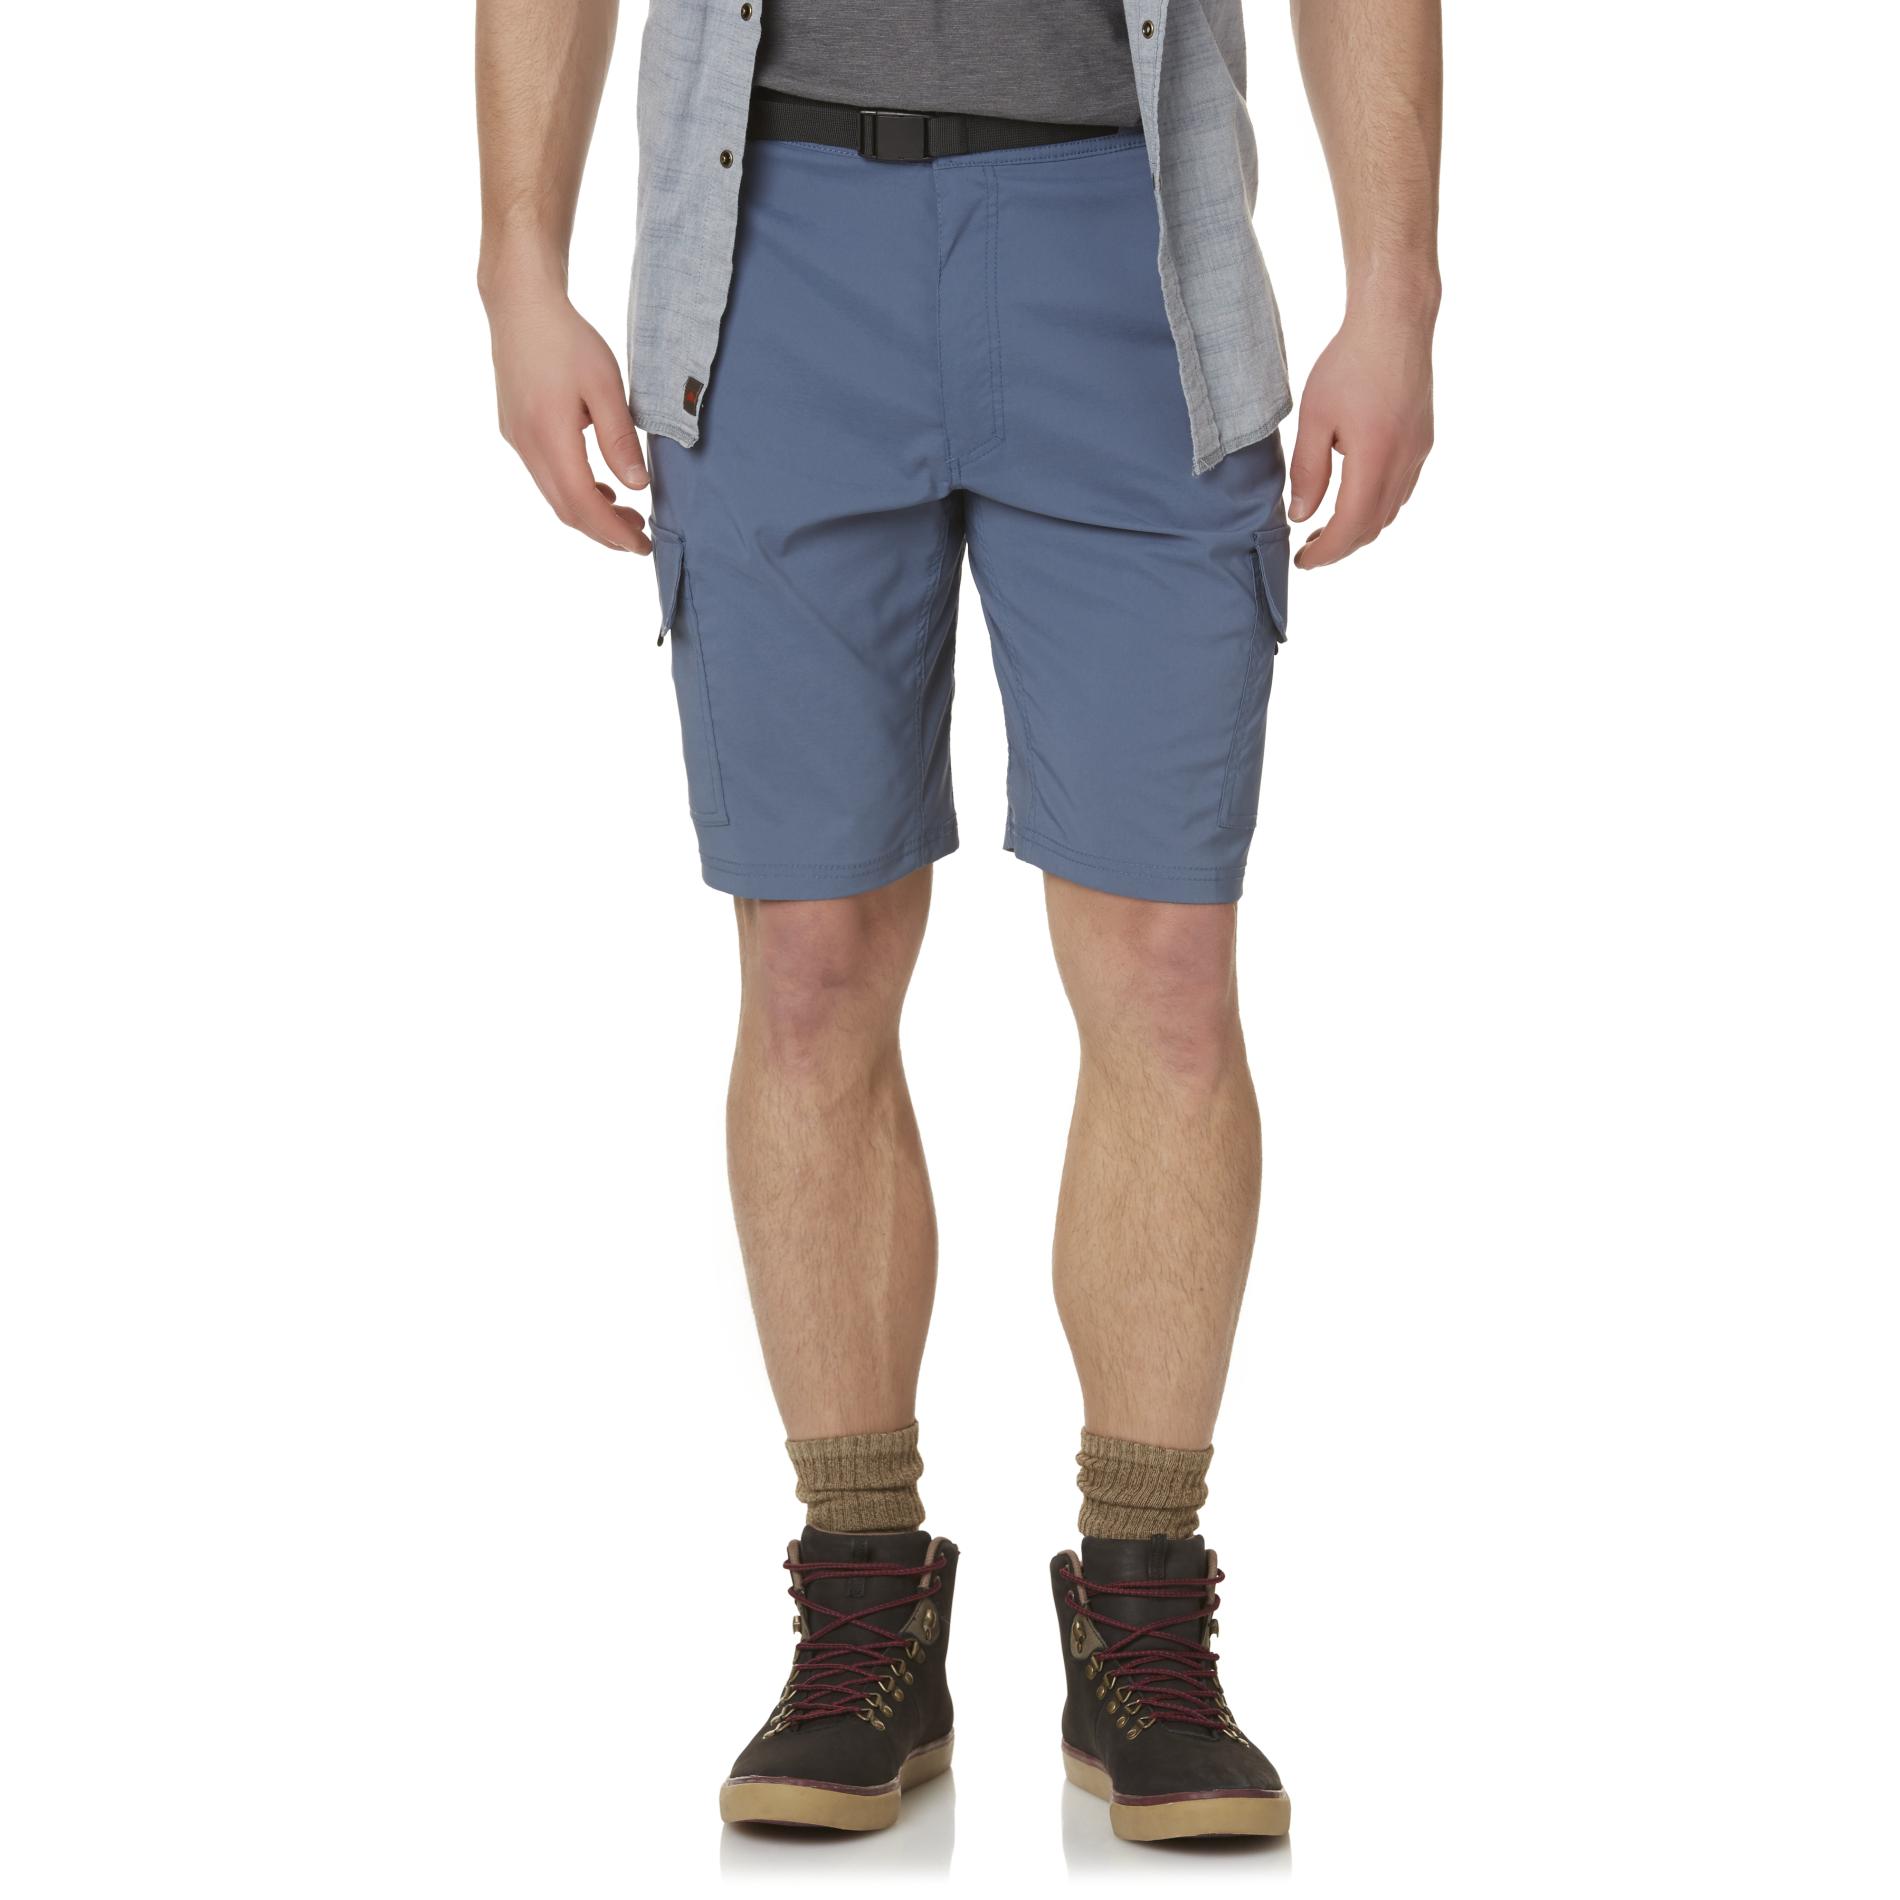 Outdoor Life Men's Belted Cargo Shorts